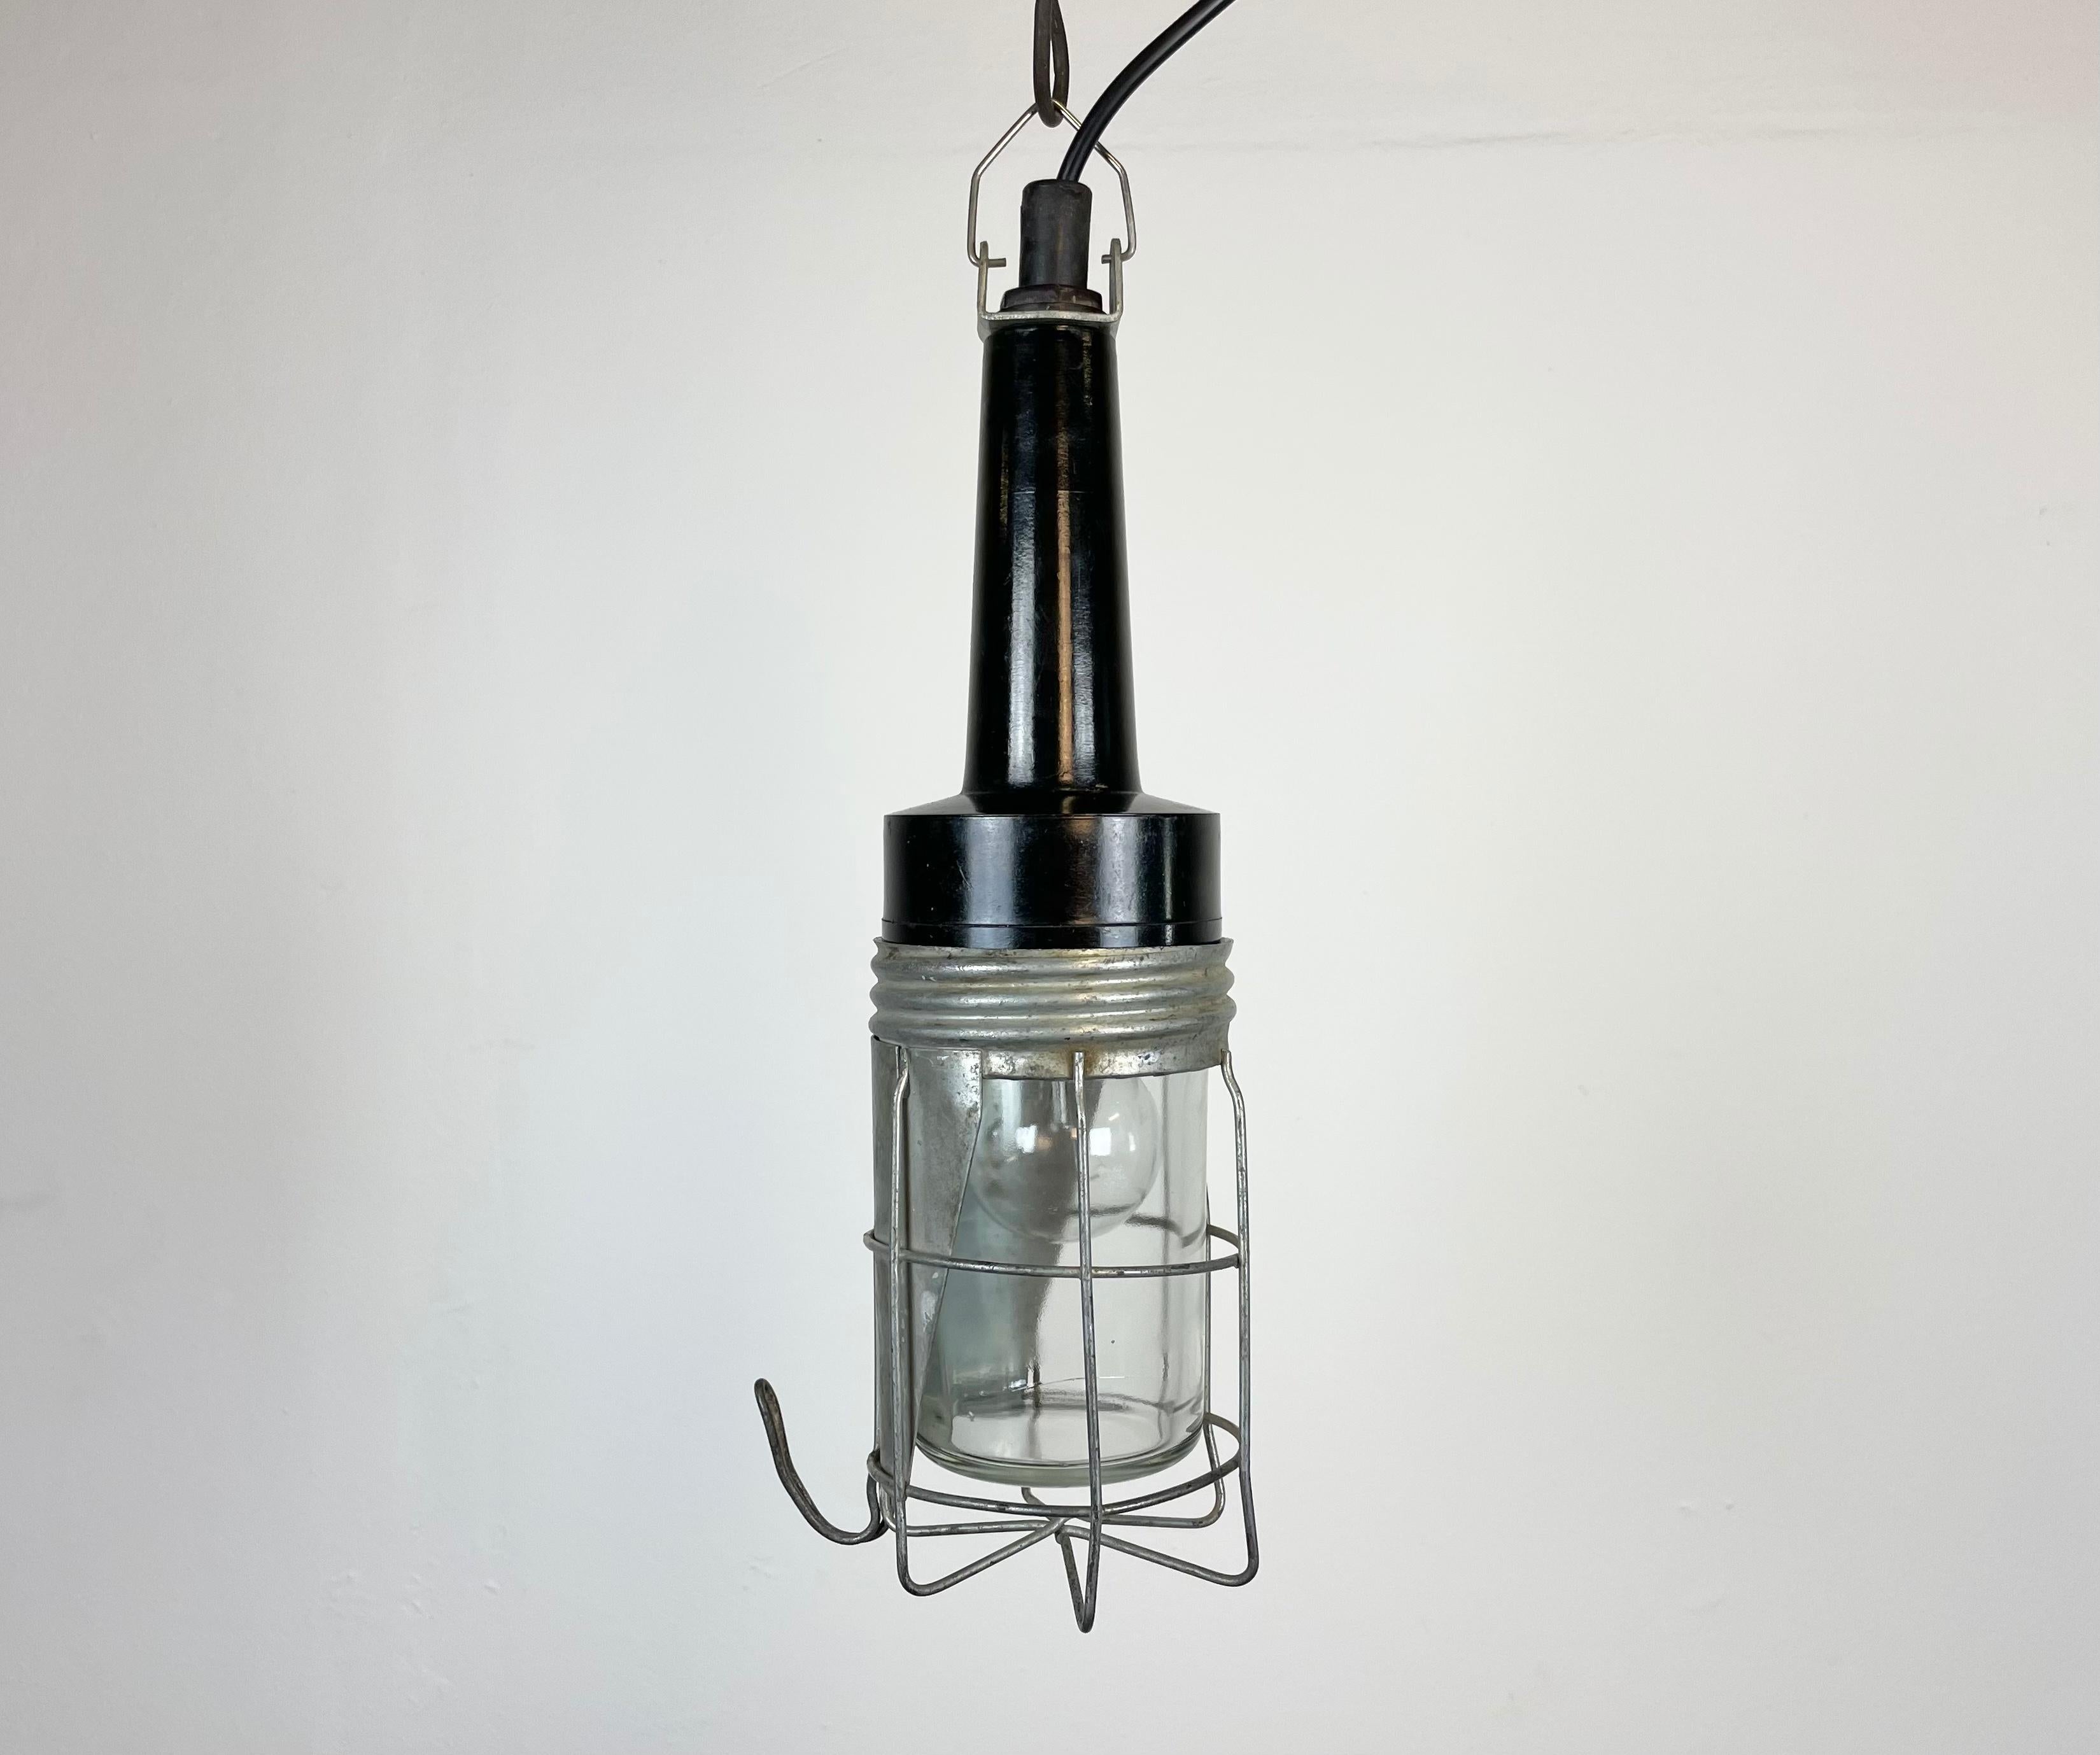 Industrial walkabout work lamp made in former Czechoslovakia during the 1960s These lamps were used in factories, workshops and army as a portable light source . It features a bakelite handle, an iron grid and clear glass cover.
The socket requires